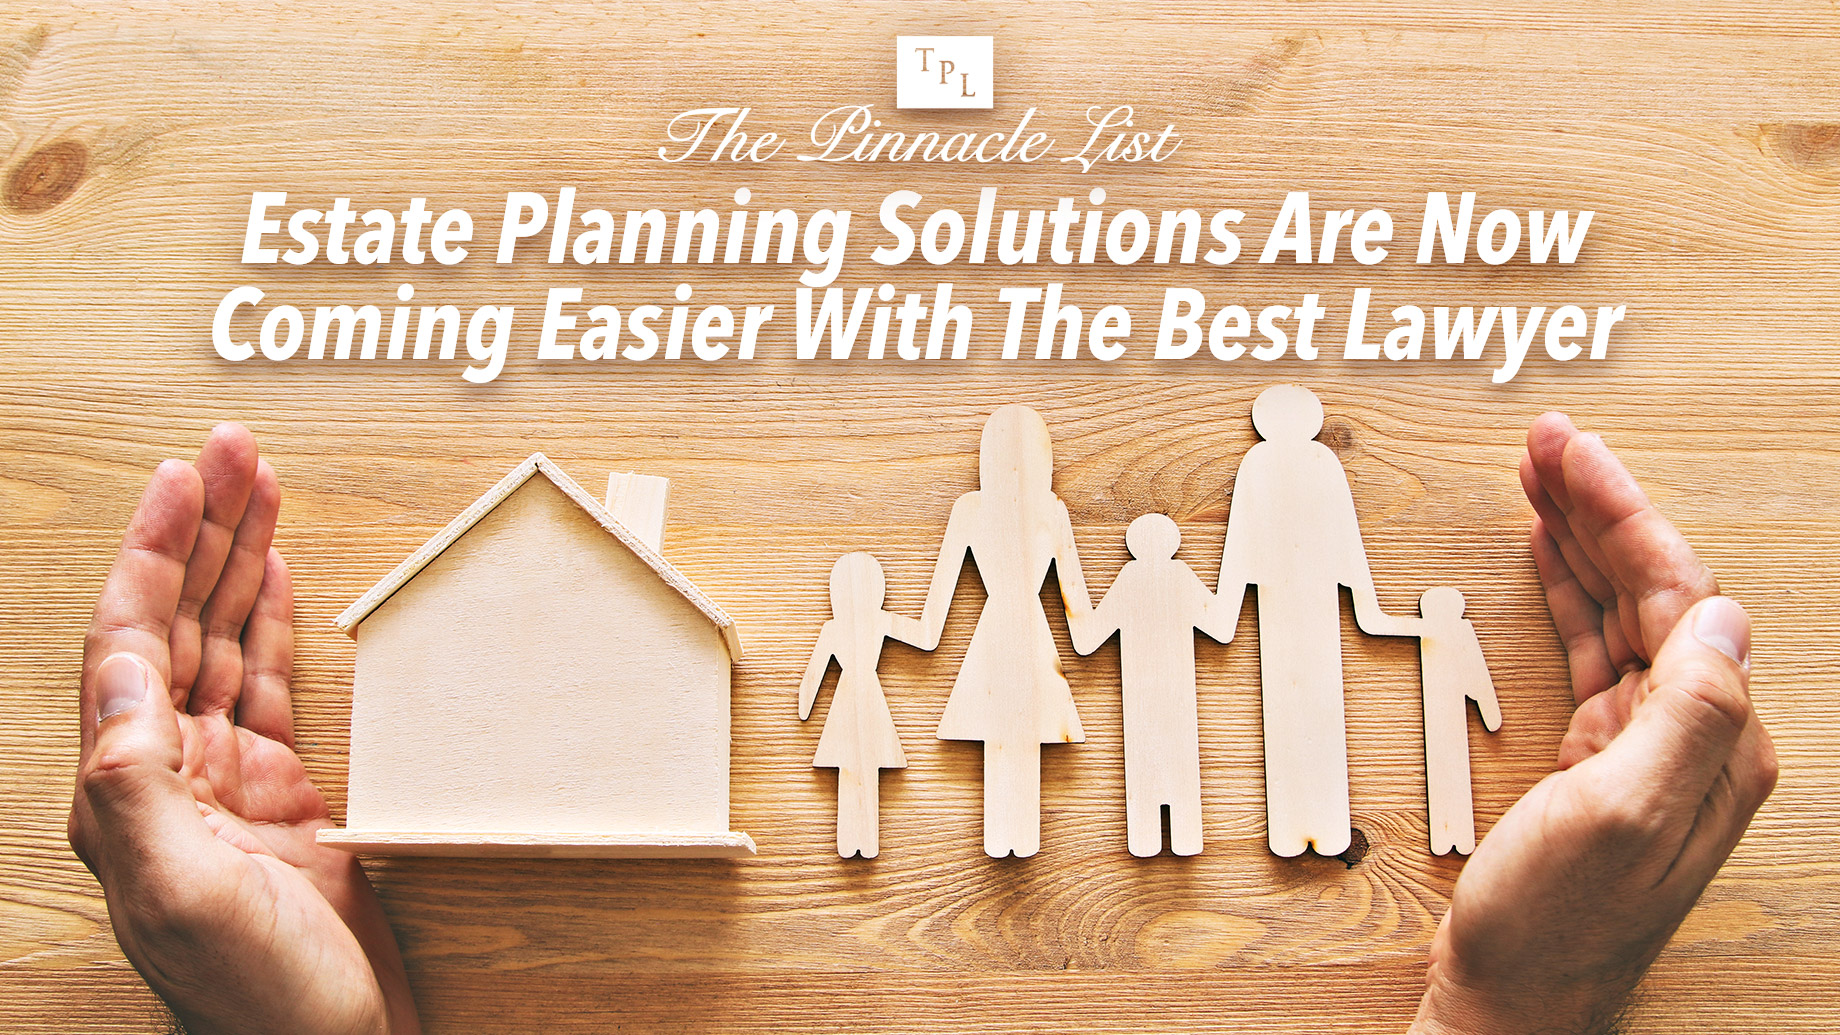 Estate Planning Solutions Are Now Coming Easier With The Best Lawyer